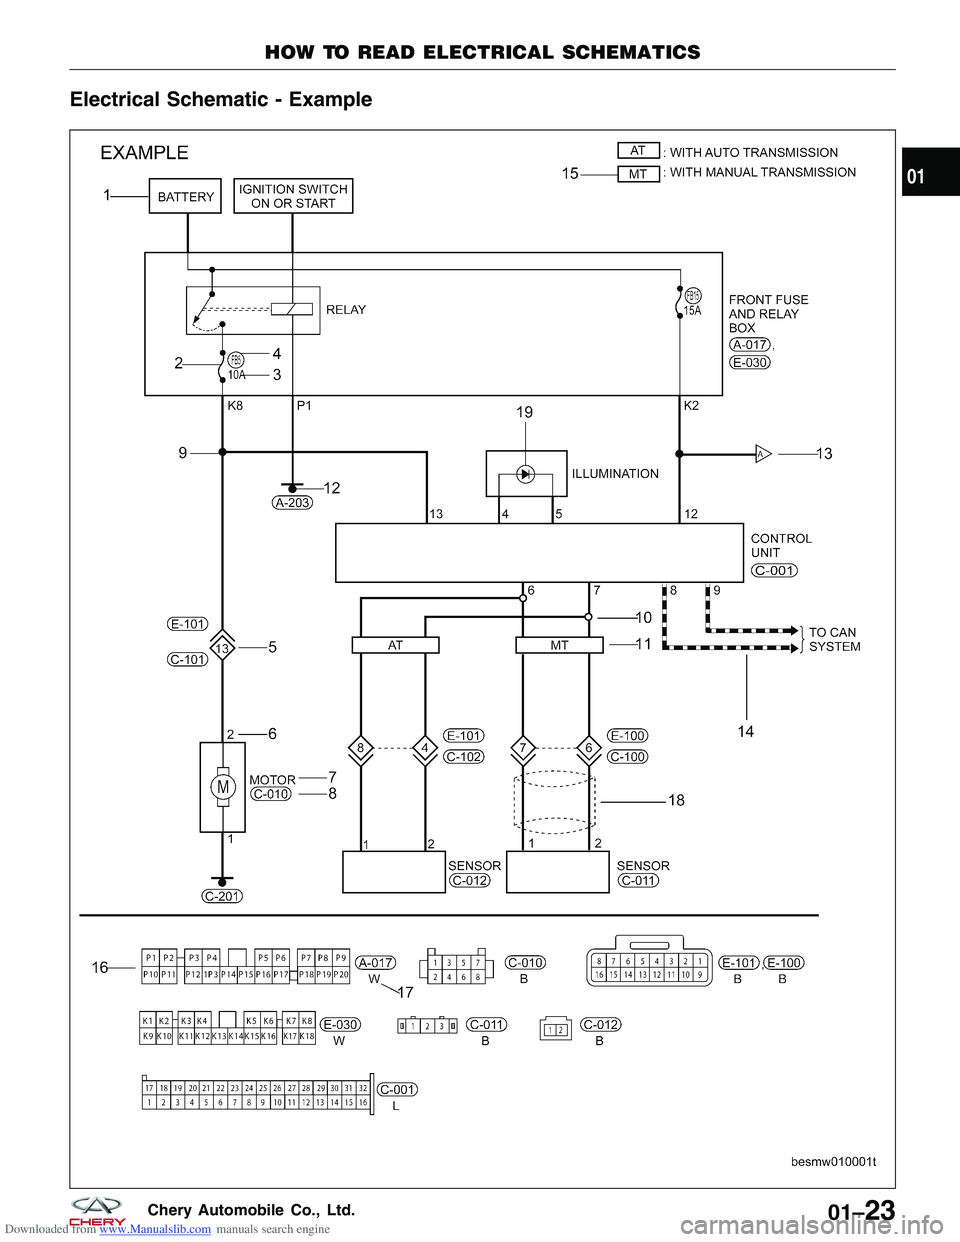 CHERY TIGGO 2009  Service Owners Manual Downloaded from www.Manualslib.com manuals search engine Electrical Schematic - Example
HOW TO READ ELECTRICAL SCHEMATICS
BESMW010001T
01
01–23Chery Automobile Co., Ltd.  